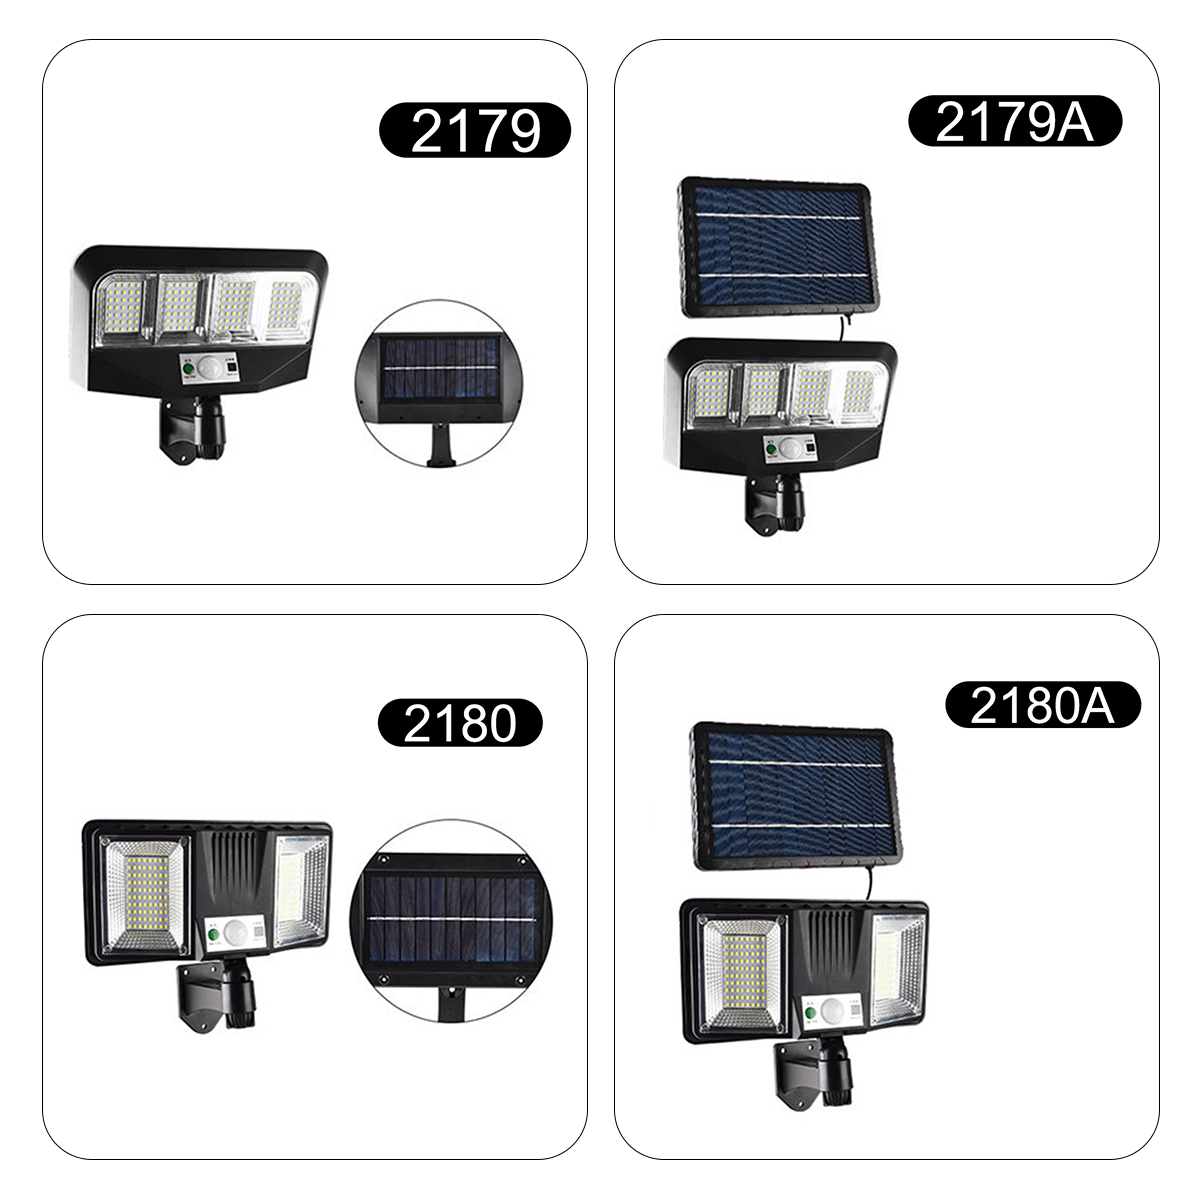 Solar-Lights-Split-Induction-Lights-with-Remote-Control-LED-Wall-Lights-Super-Bright-Outdoor-Camping-1897763-8